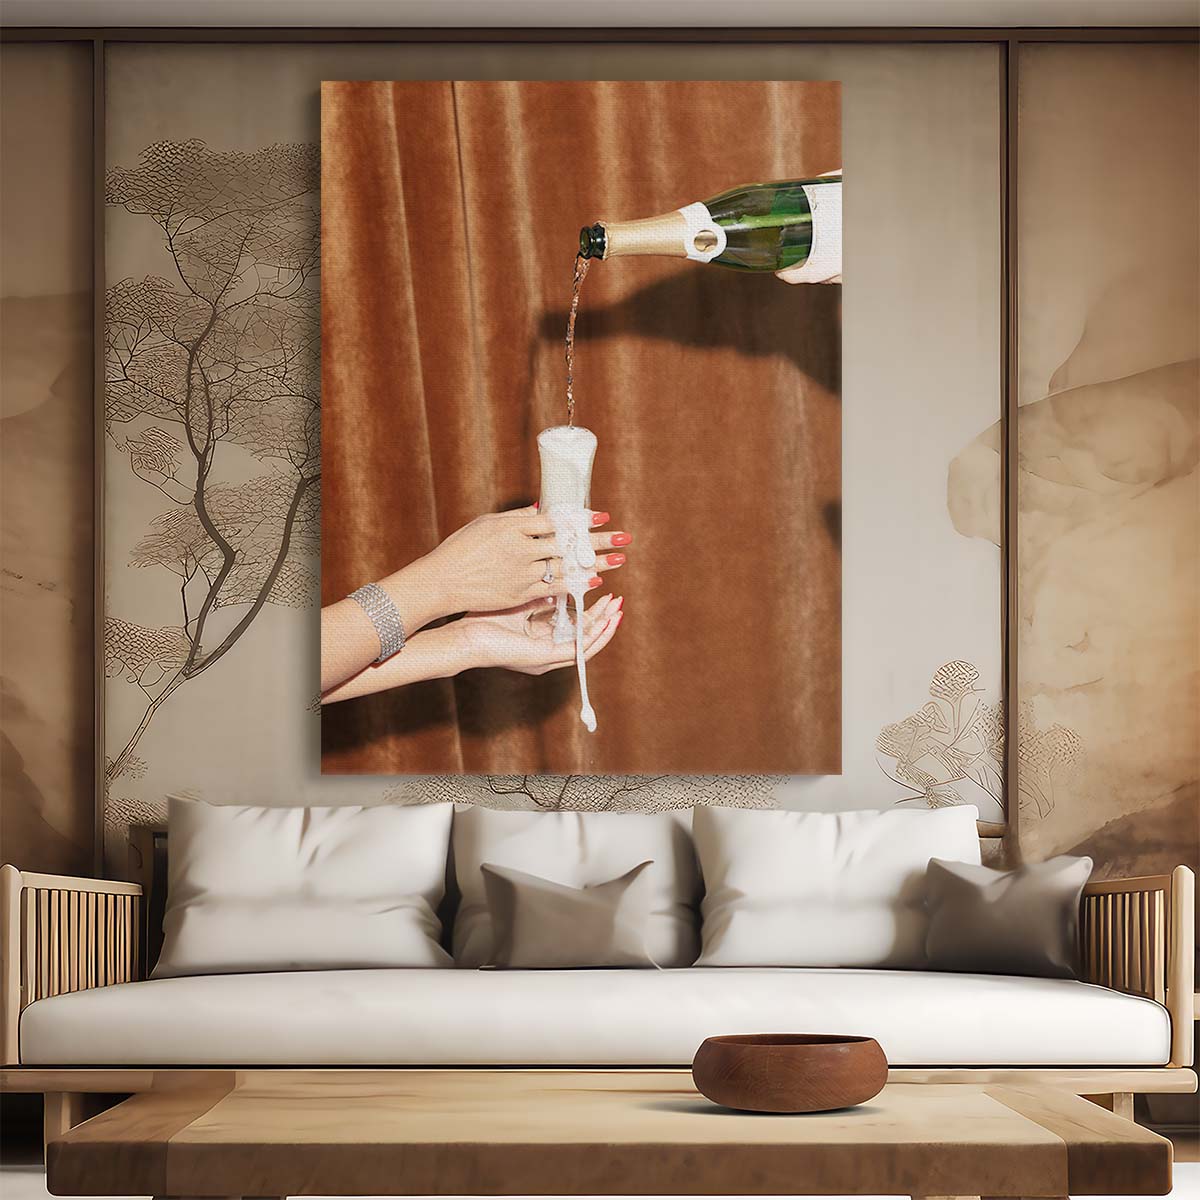 Vintage Still Life Champagne Celebration Photography Wall Art by Luxuriance Designs, made in USA